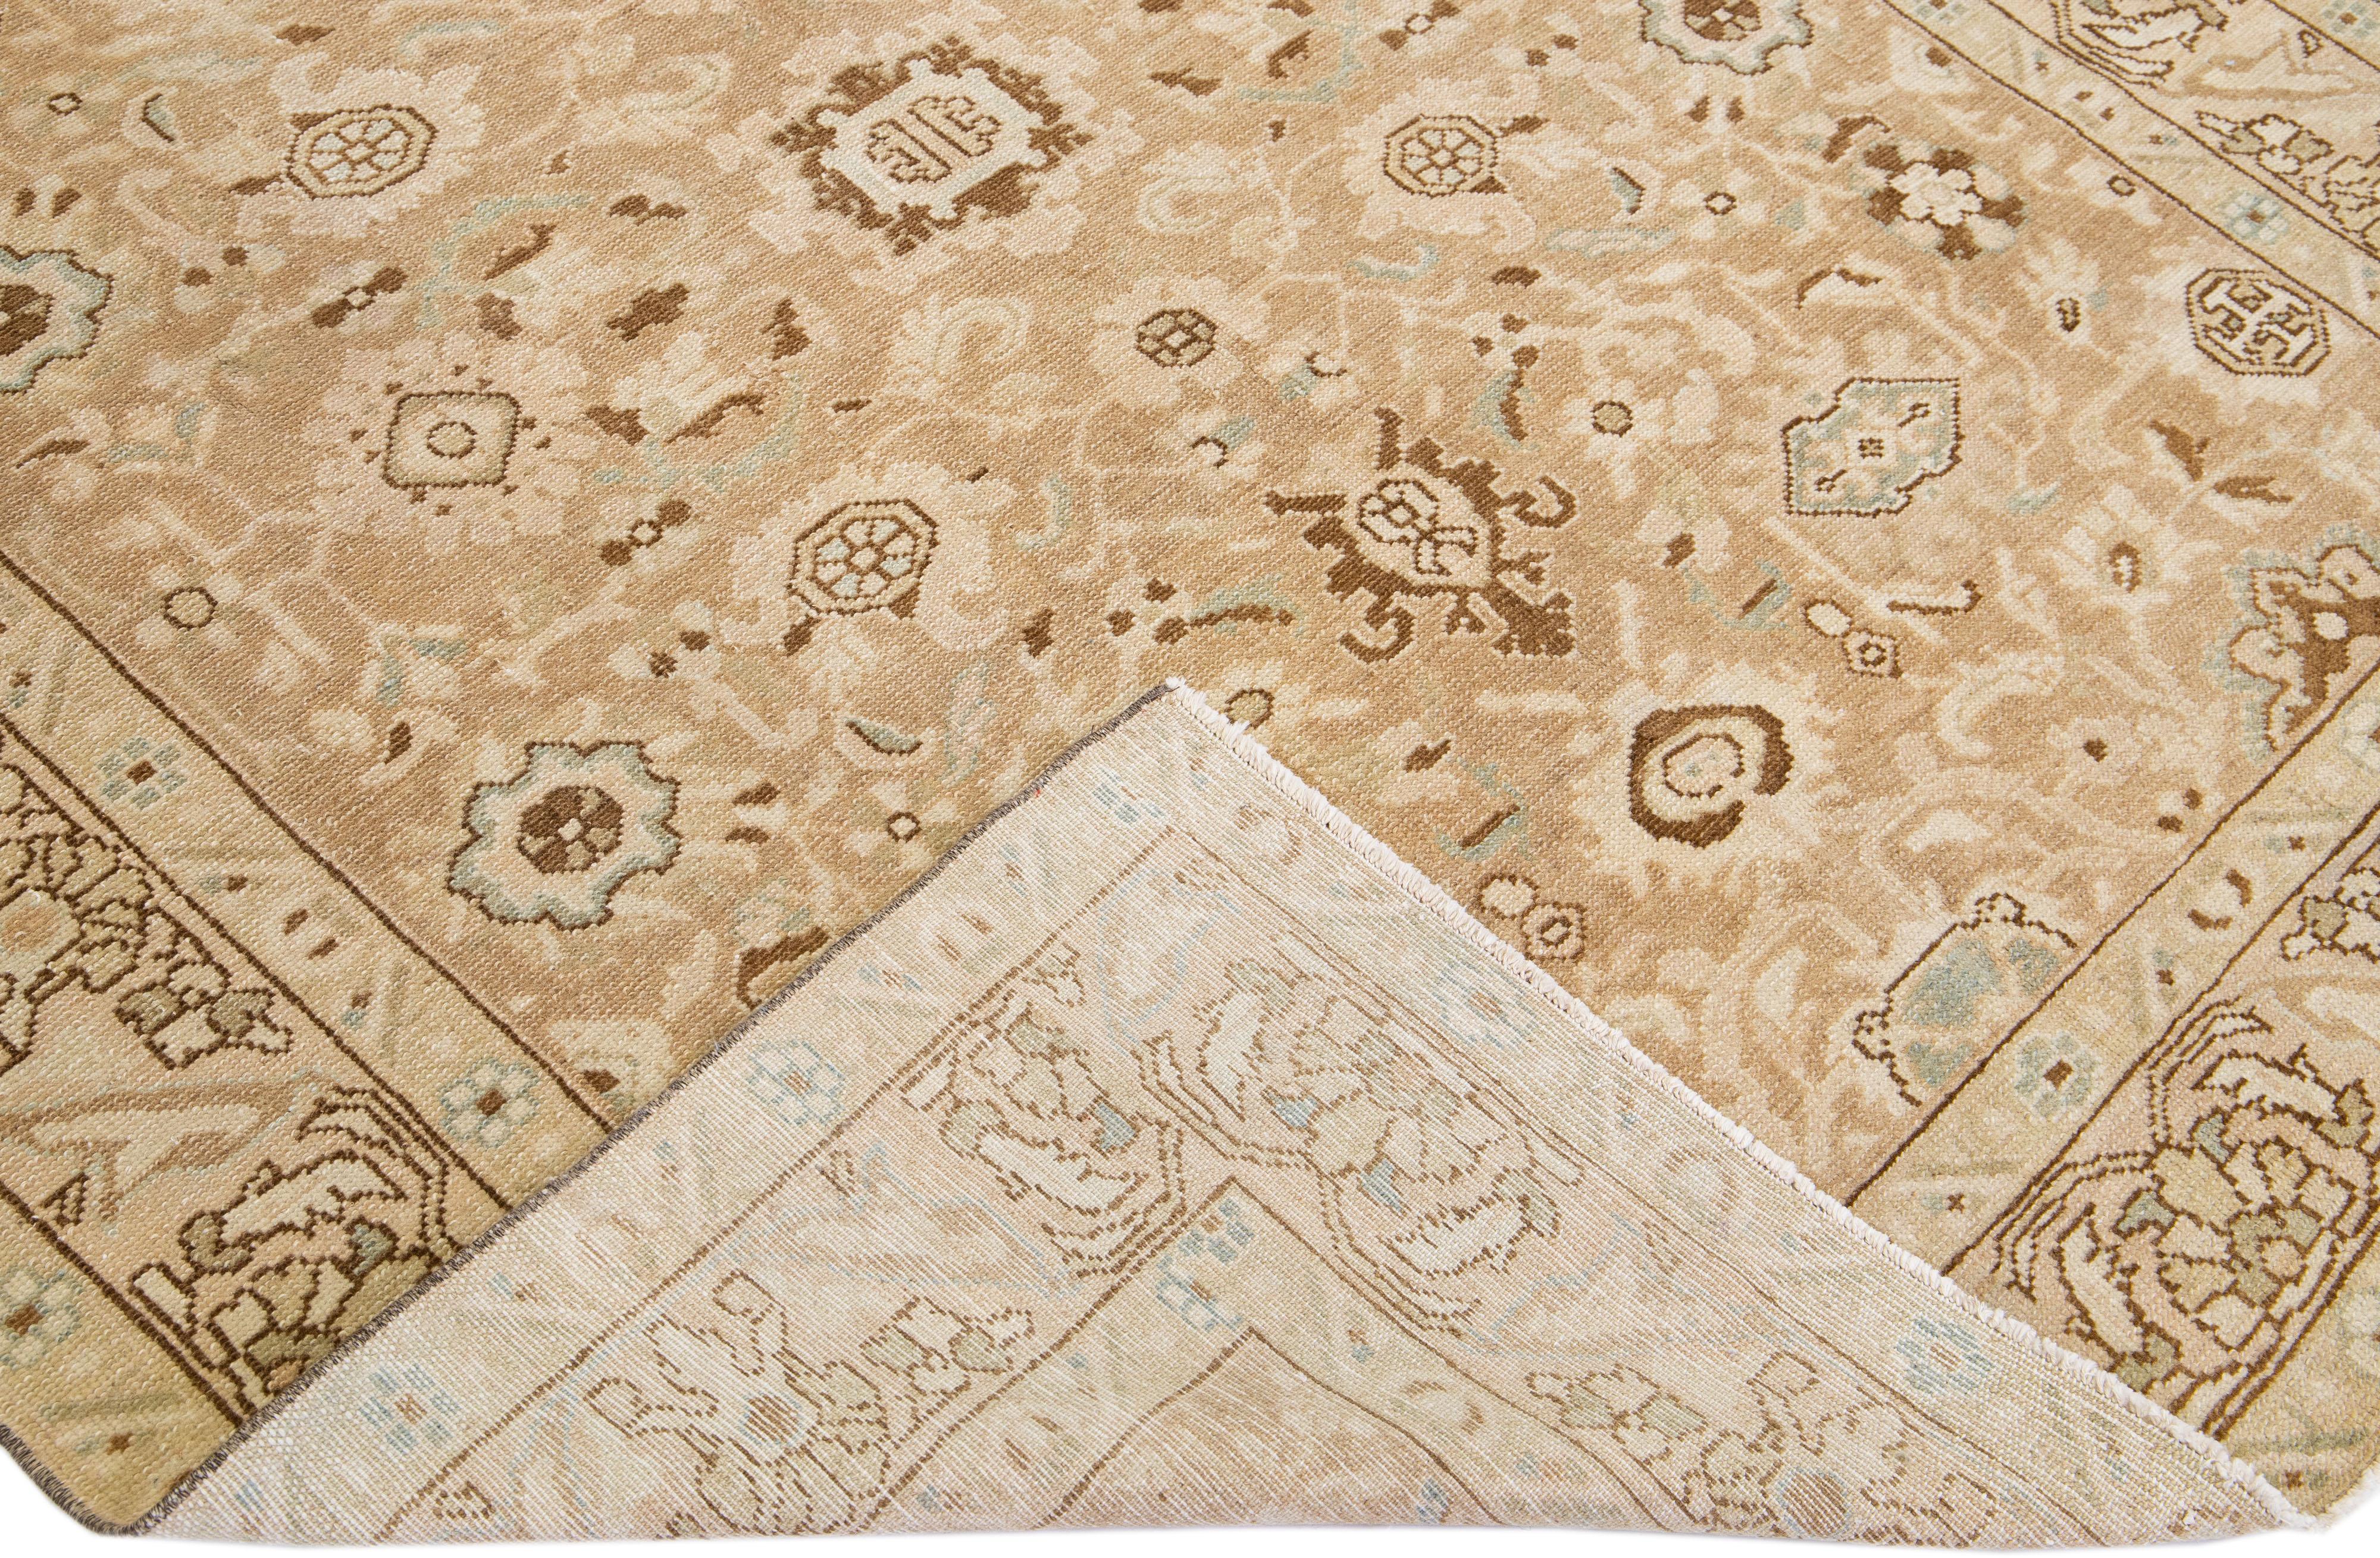 A beautiful Antique Malayer hand-knotted wool rug with a beige color field. This rug has blue and brown accents in an all-over floral pattern design.

This rug measures 5'6